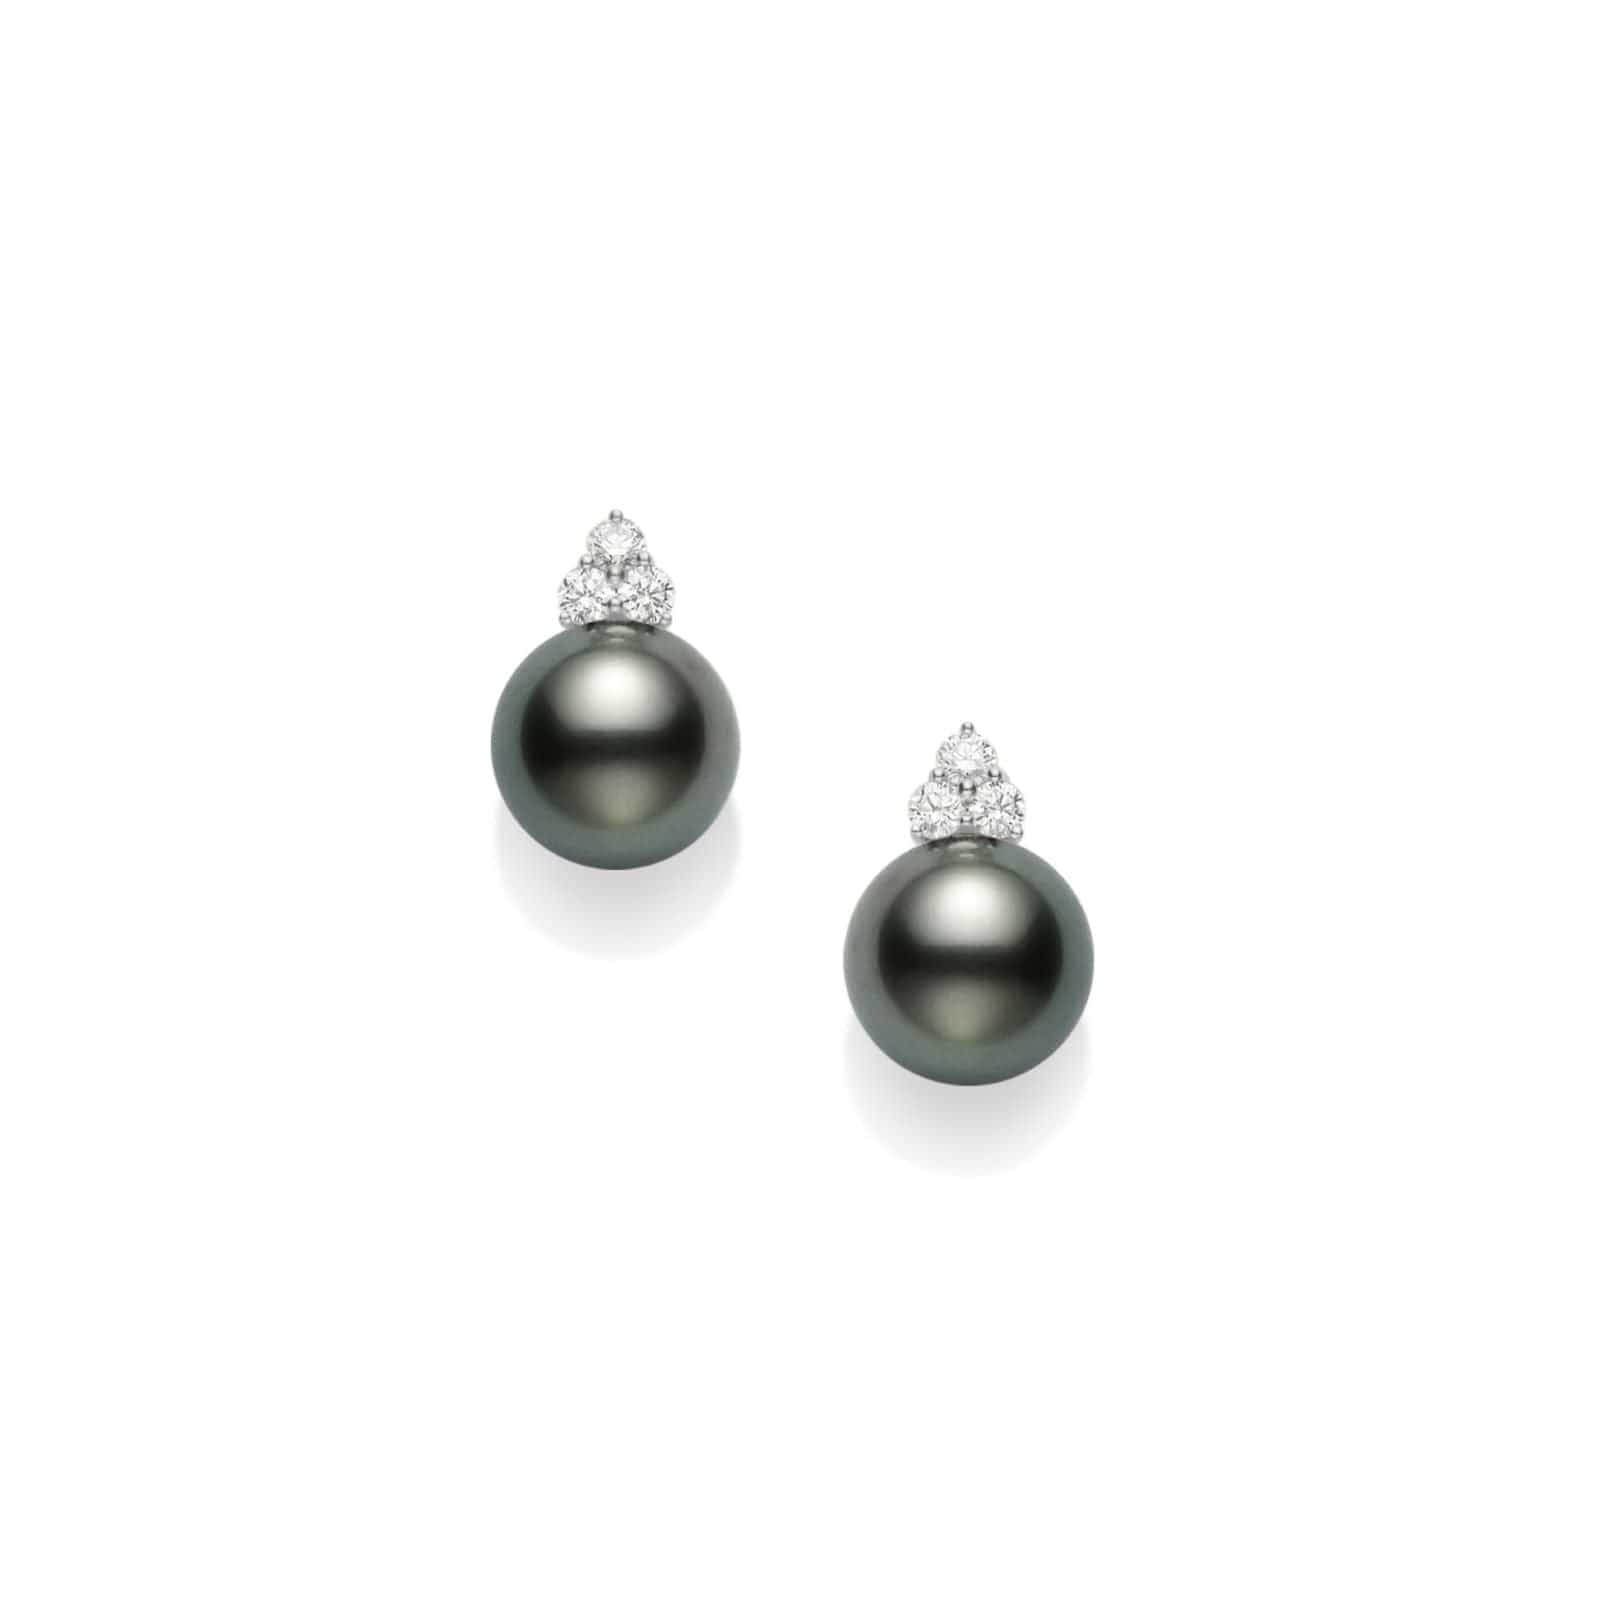 18K White Gold & Black South Sea Cultured Pearl Drop Earrings with Diamonds